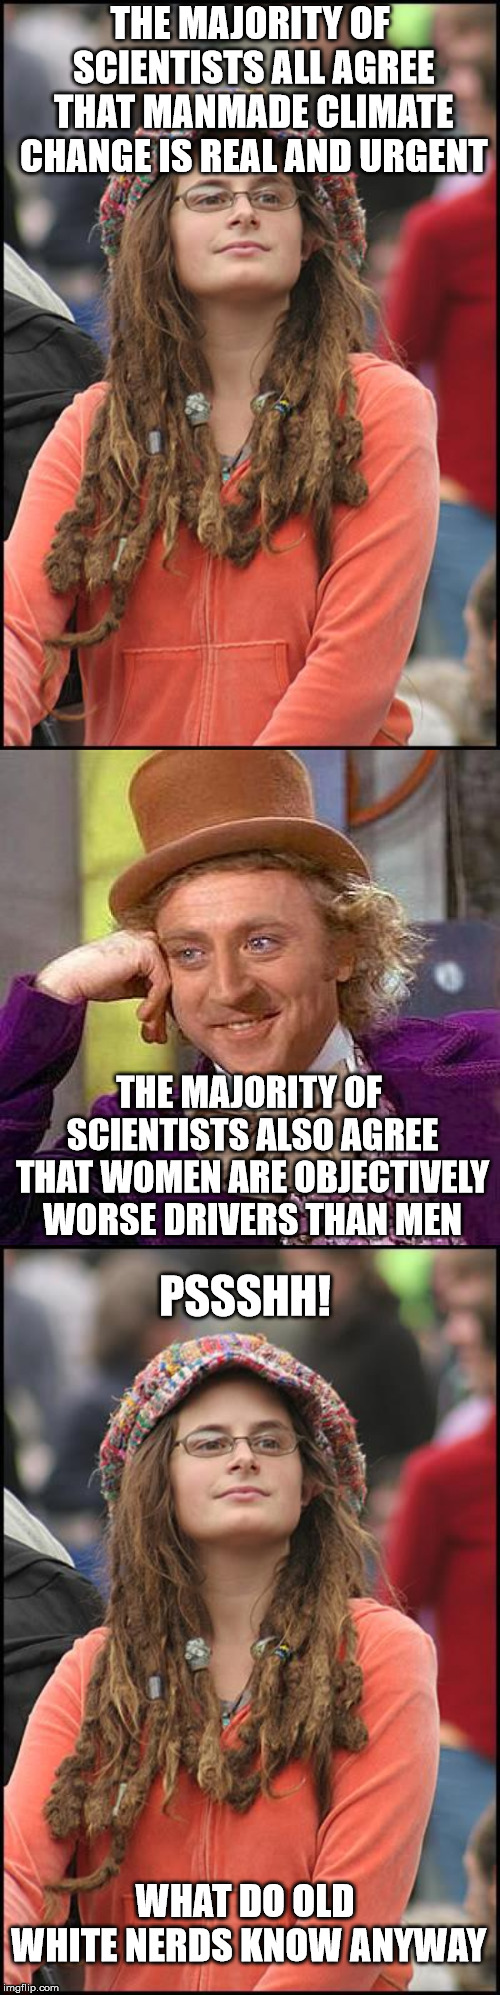 An Inconvenient Truth | THE MAJORITY OF SCIENTISTS ALL AGREE THAT MANMADE CLIMATE CHANGE IS REAL AND URGENT; THE MAJORITY OF SCIENTISTS ALSO AGREE THAT WOMEN ARE OBJECTIVELY WORSE DRIVERS THAN MEN; PSSSHH! WHAT DO OLD WHITE NERDS KNOW ANYWAY | image tagged in memes,creepy condescending wonka,college liberal | made w/ Imgflip meme maker